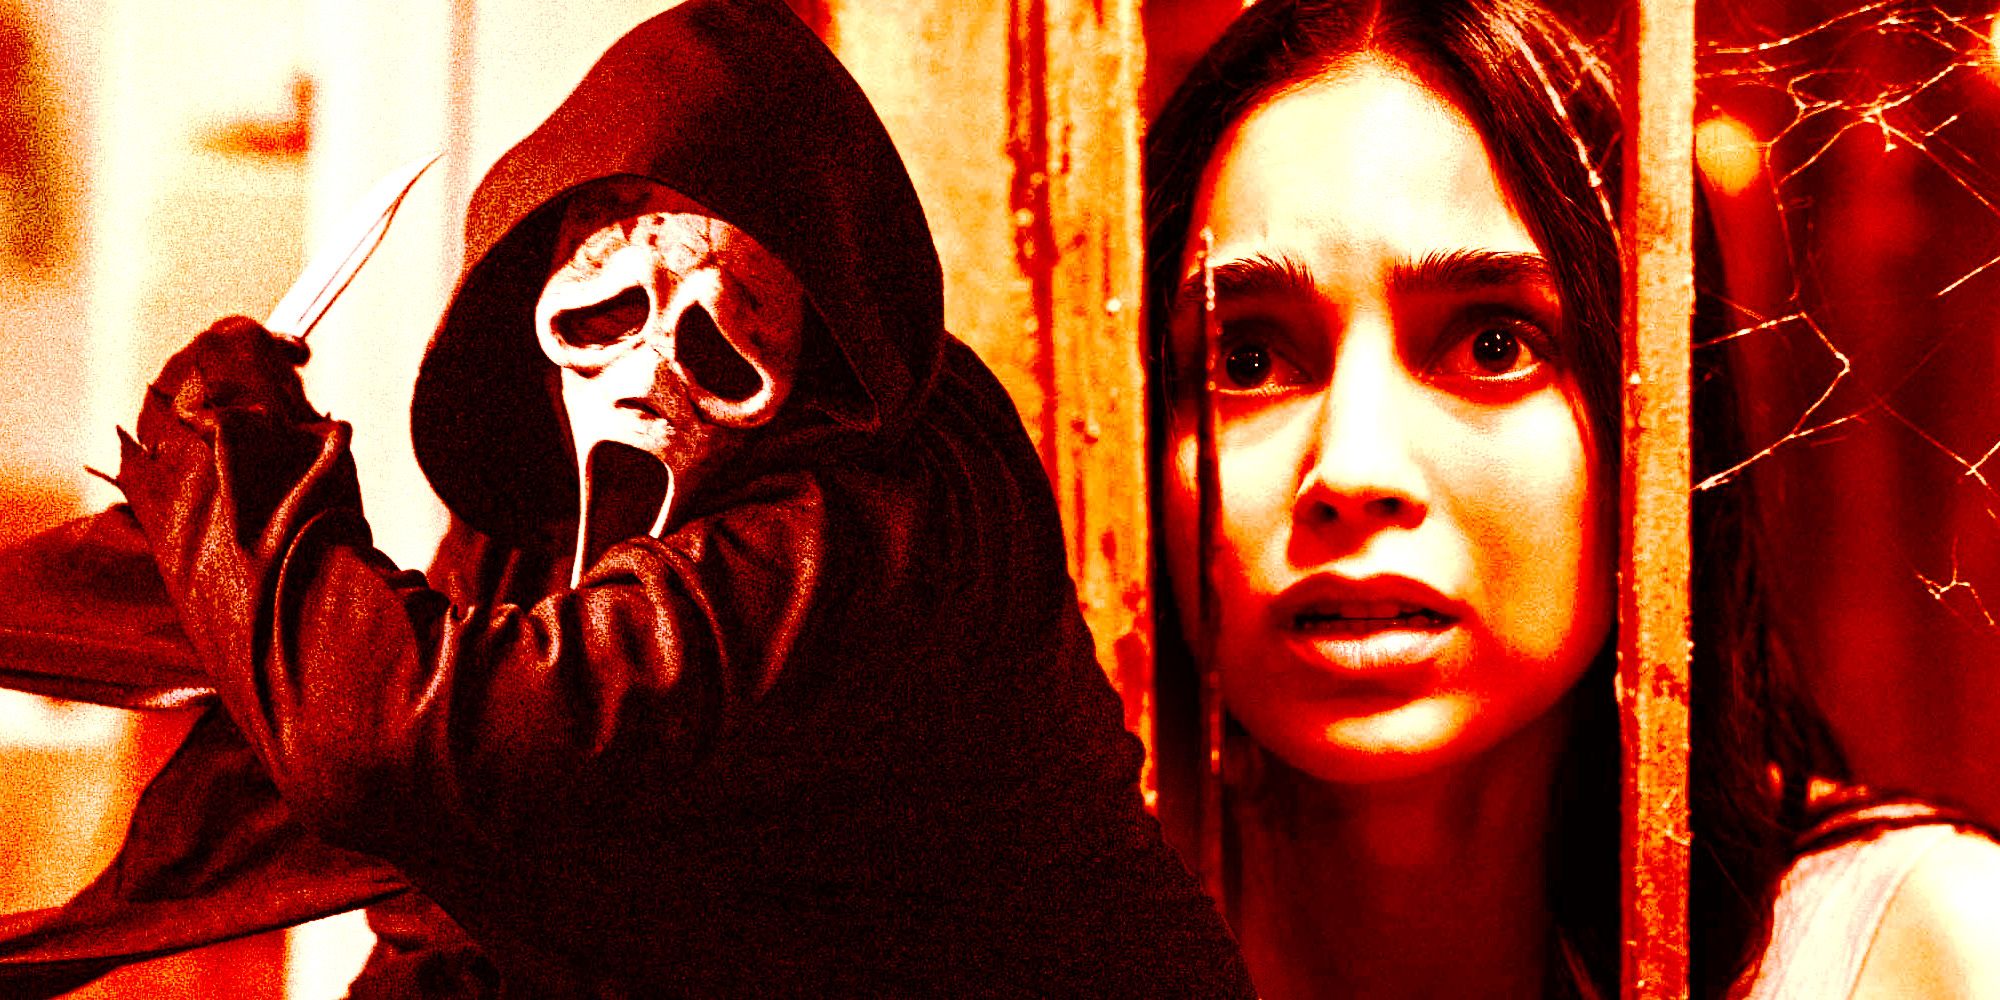 A split image of Ghostface swinging a knife and Melissa Barrera as Samantha Carpenter looking scared behind bars in Scream